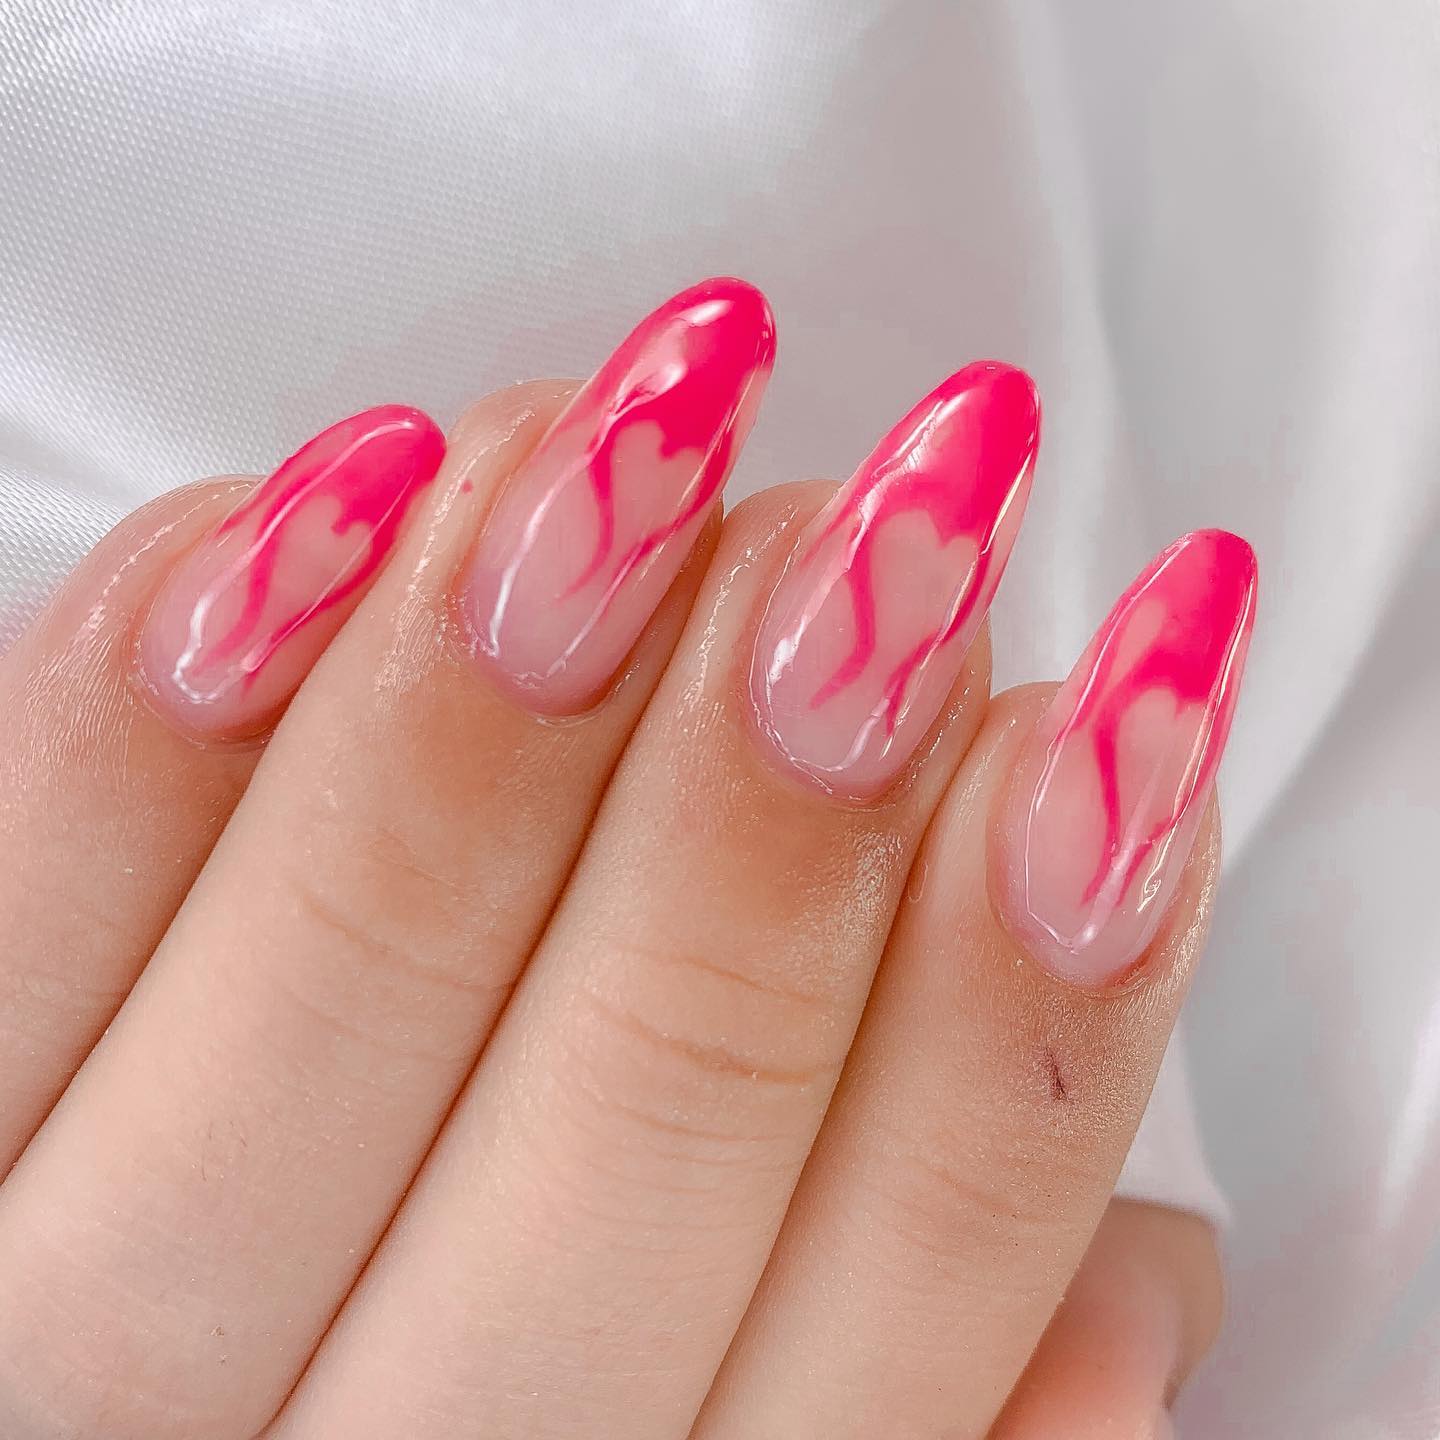 If you’re all about lovely and loving nails this fierce mani is for you. Want to look like you’re in love? This is the perfect manicure to show off.